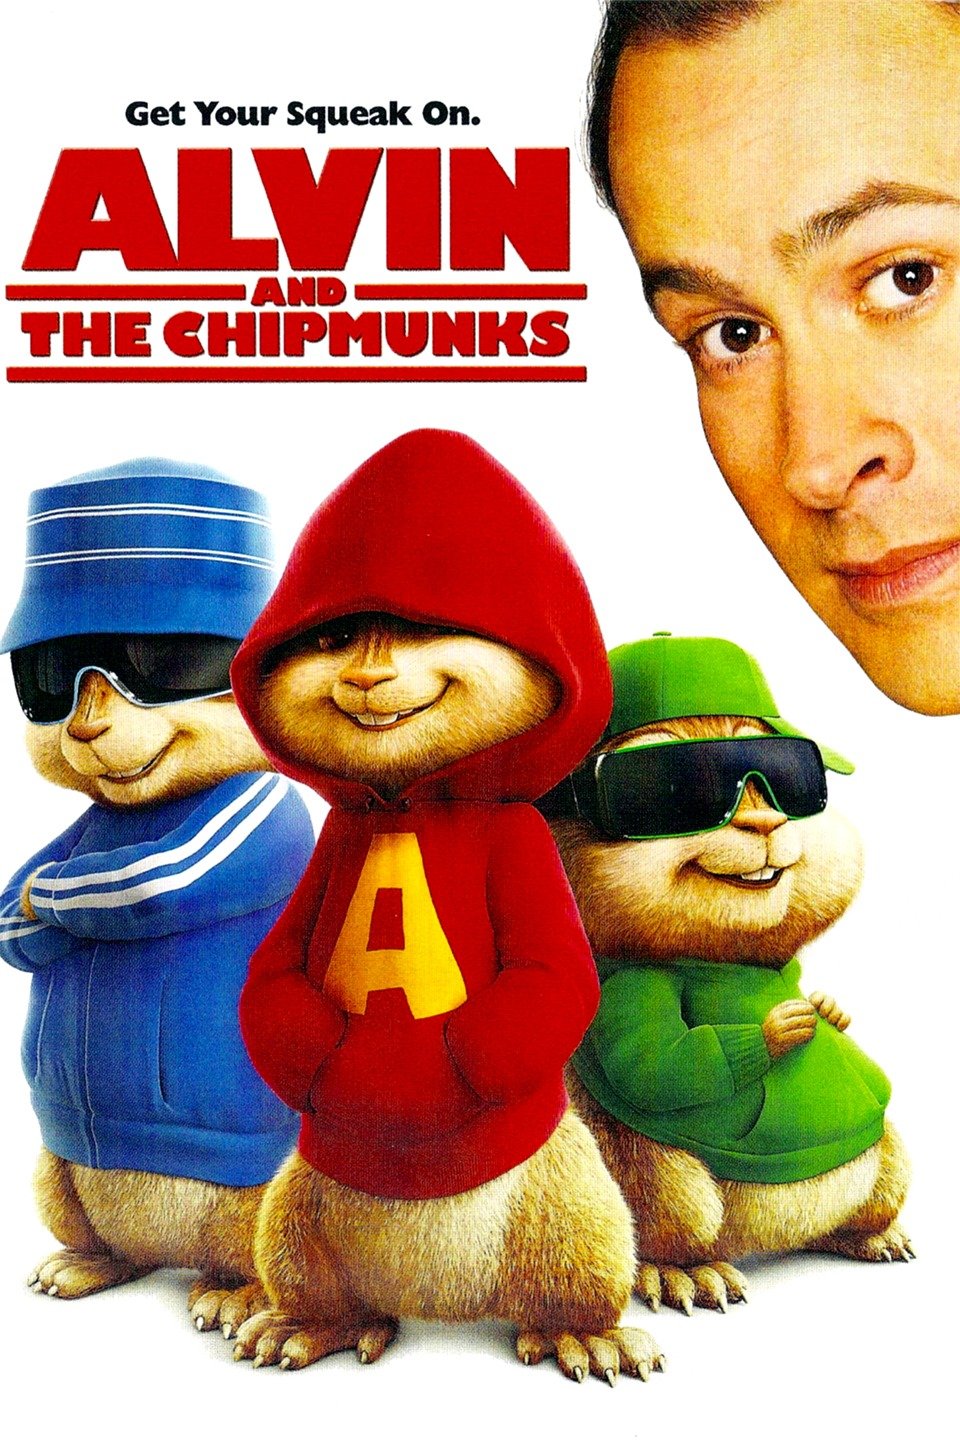 Alvin and the Chipmunks - Rotten Tomatoes